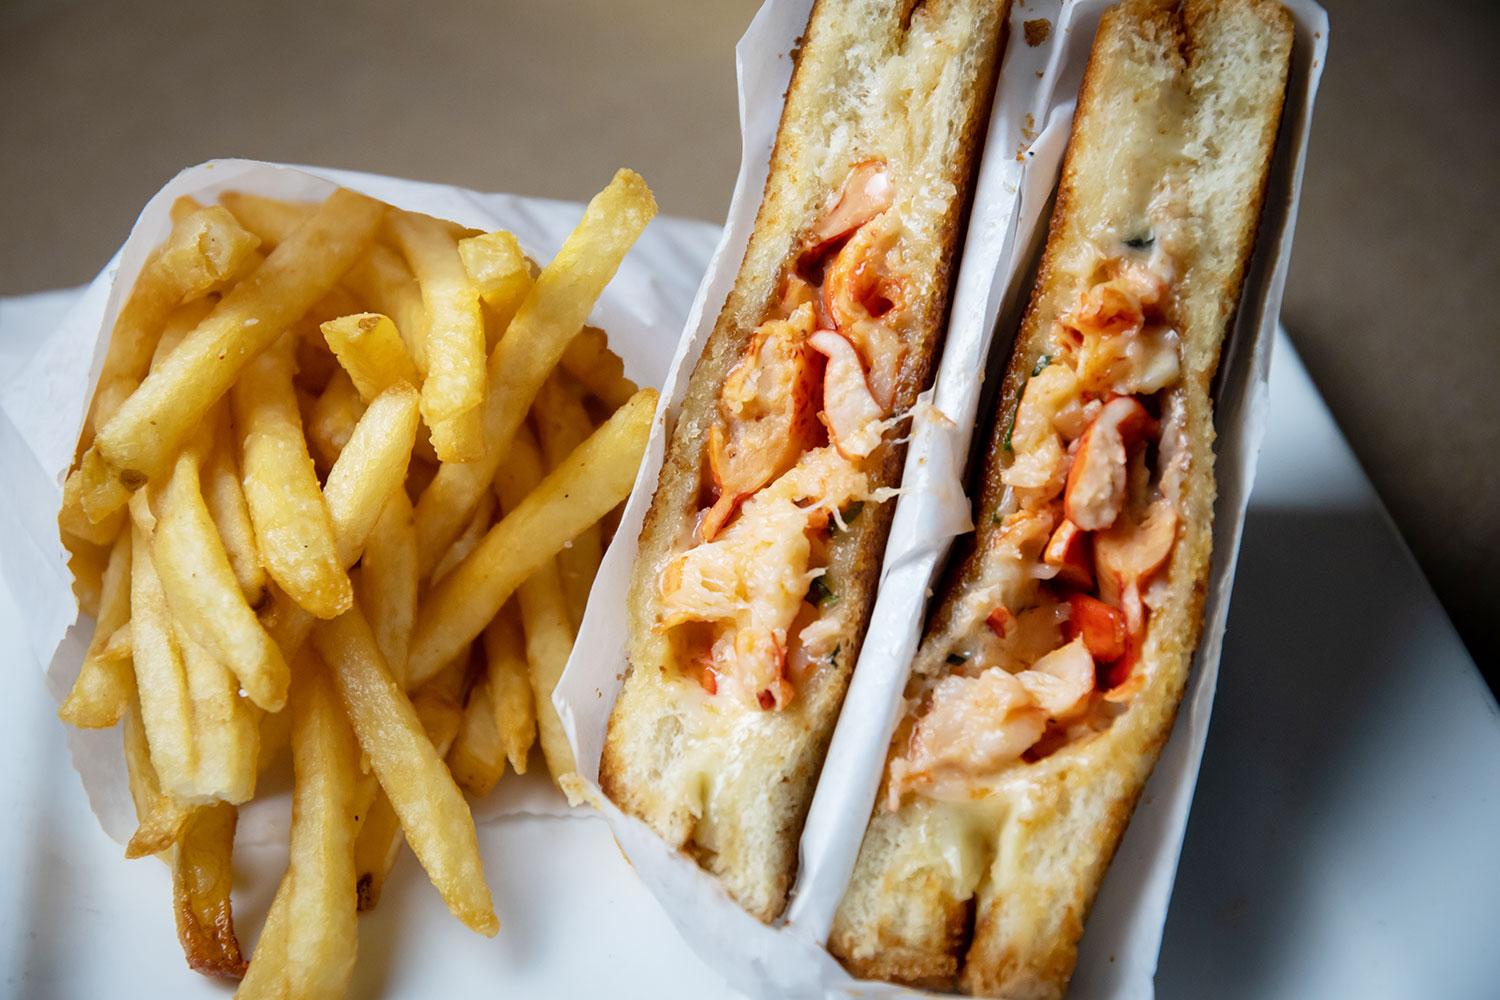 The Lobster grilled cheese